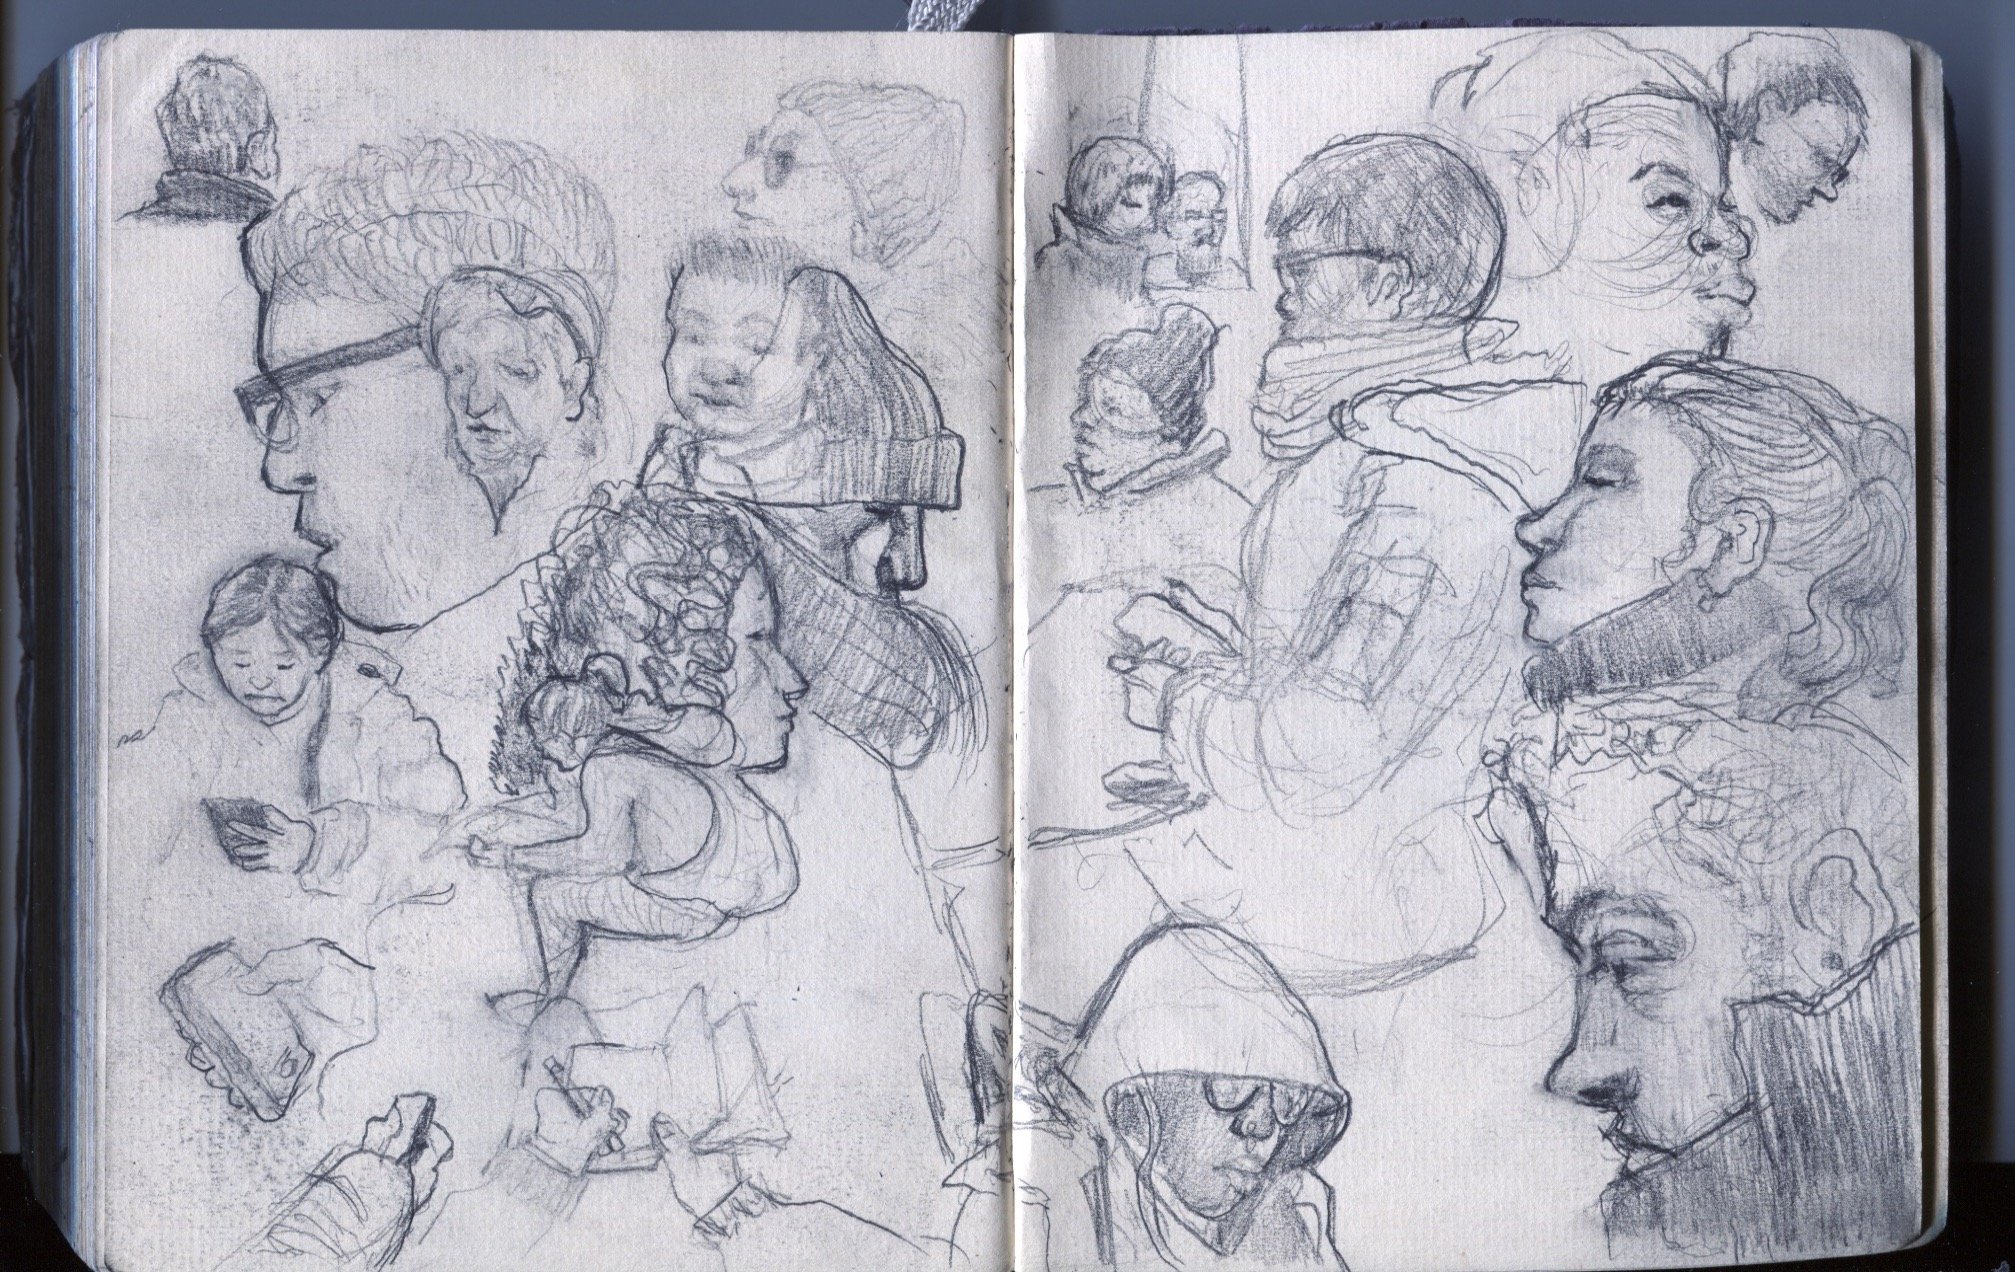   Latest Pages from The Sketchbook, 